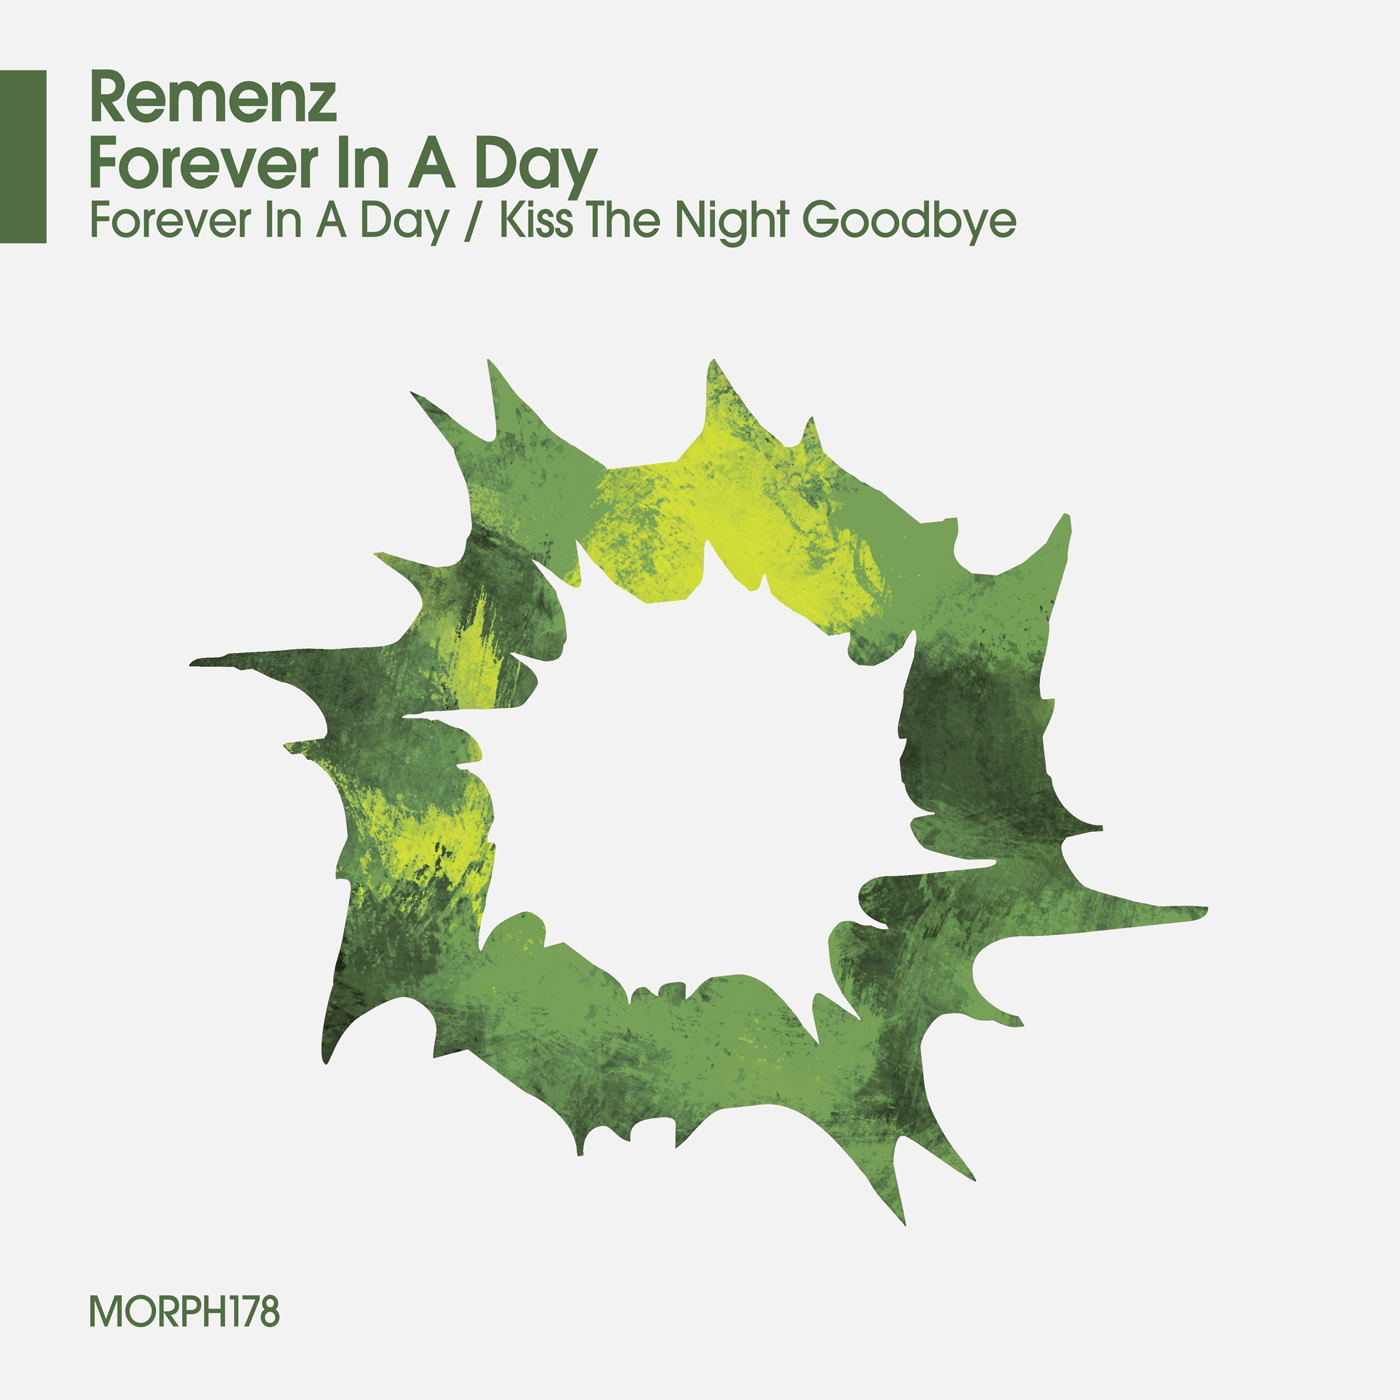 Remenz - Foreer In a Day